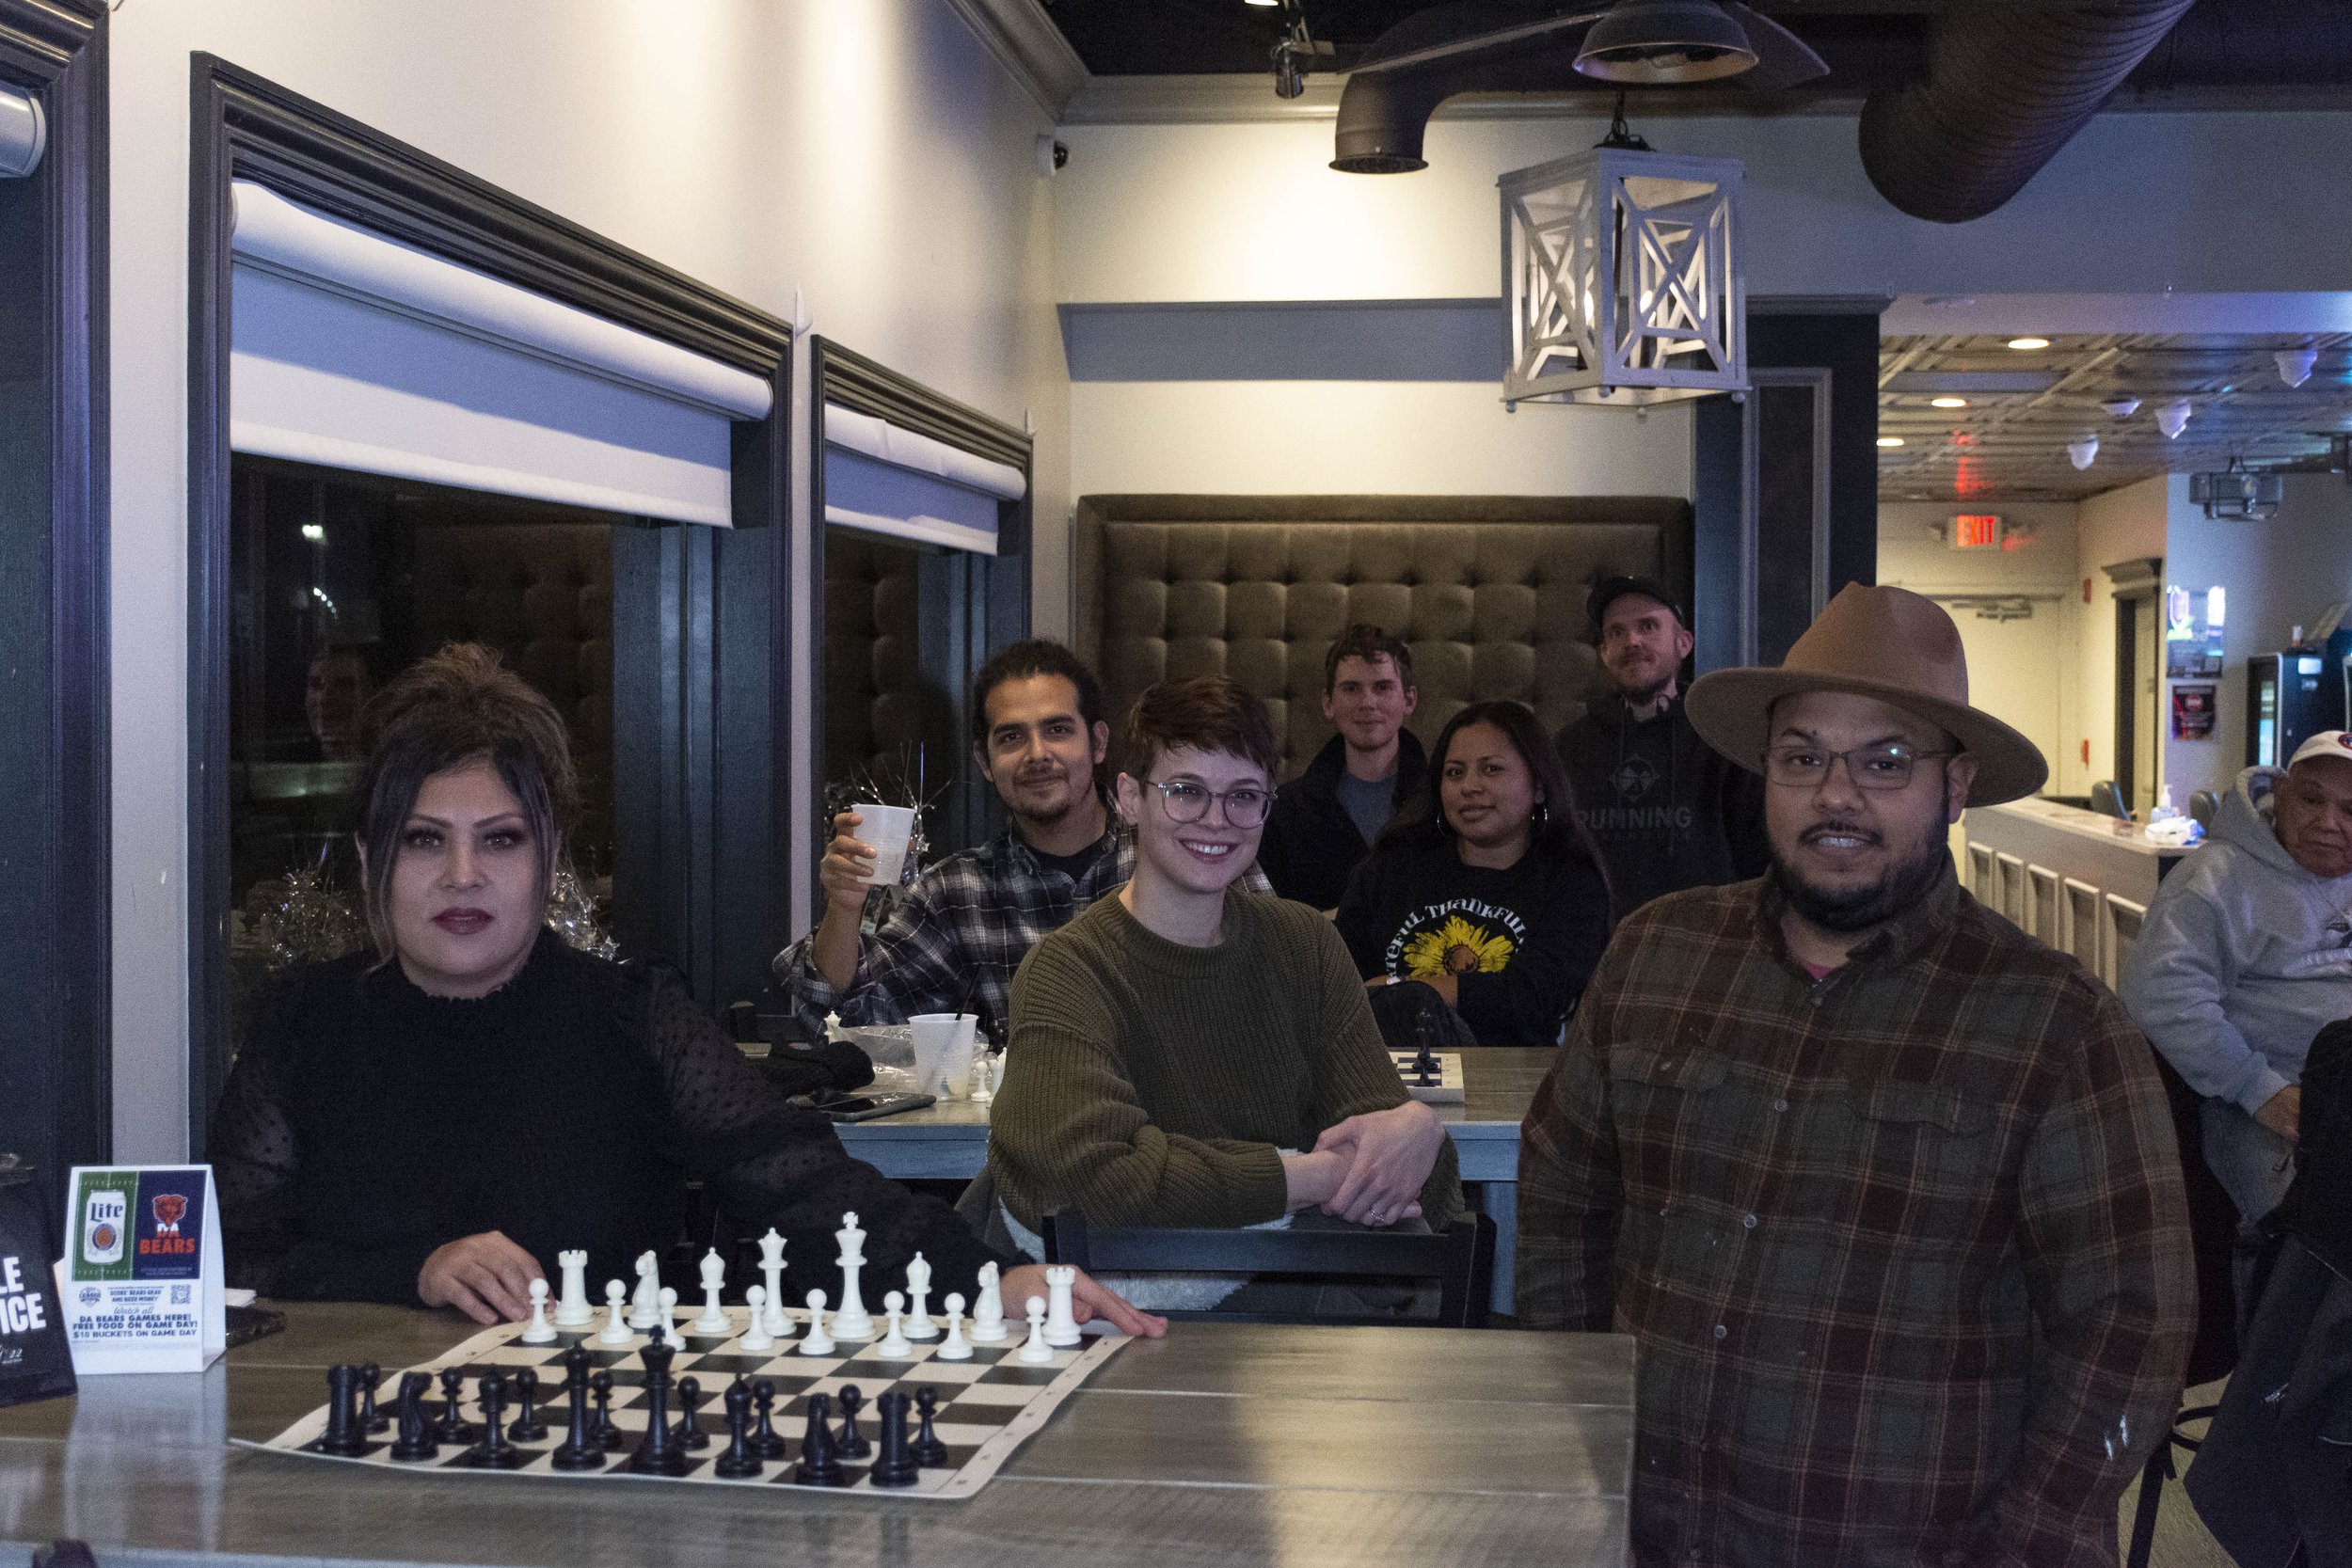 New Cicero/Berwyn Chess Club Aims to Build Community: 'Chess Emulates Life'  — Cicero Independiente